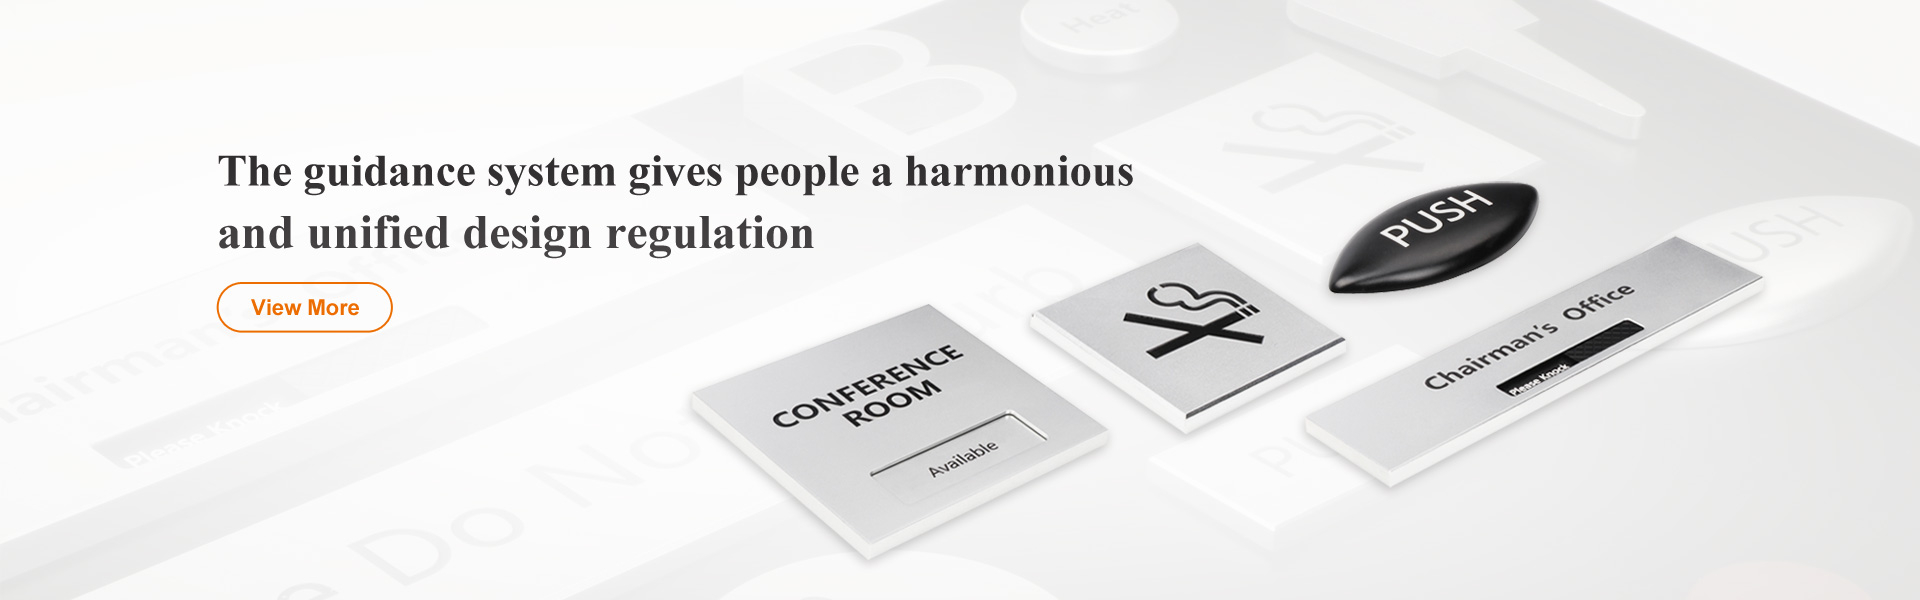 The guidance system gives people a harmonious and unified design regulation